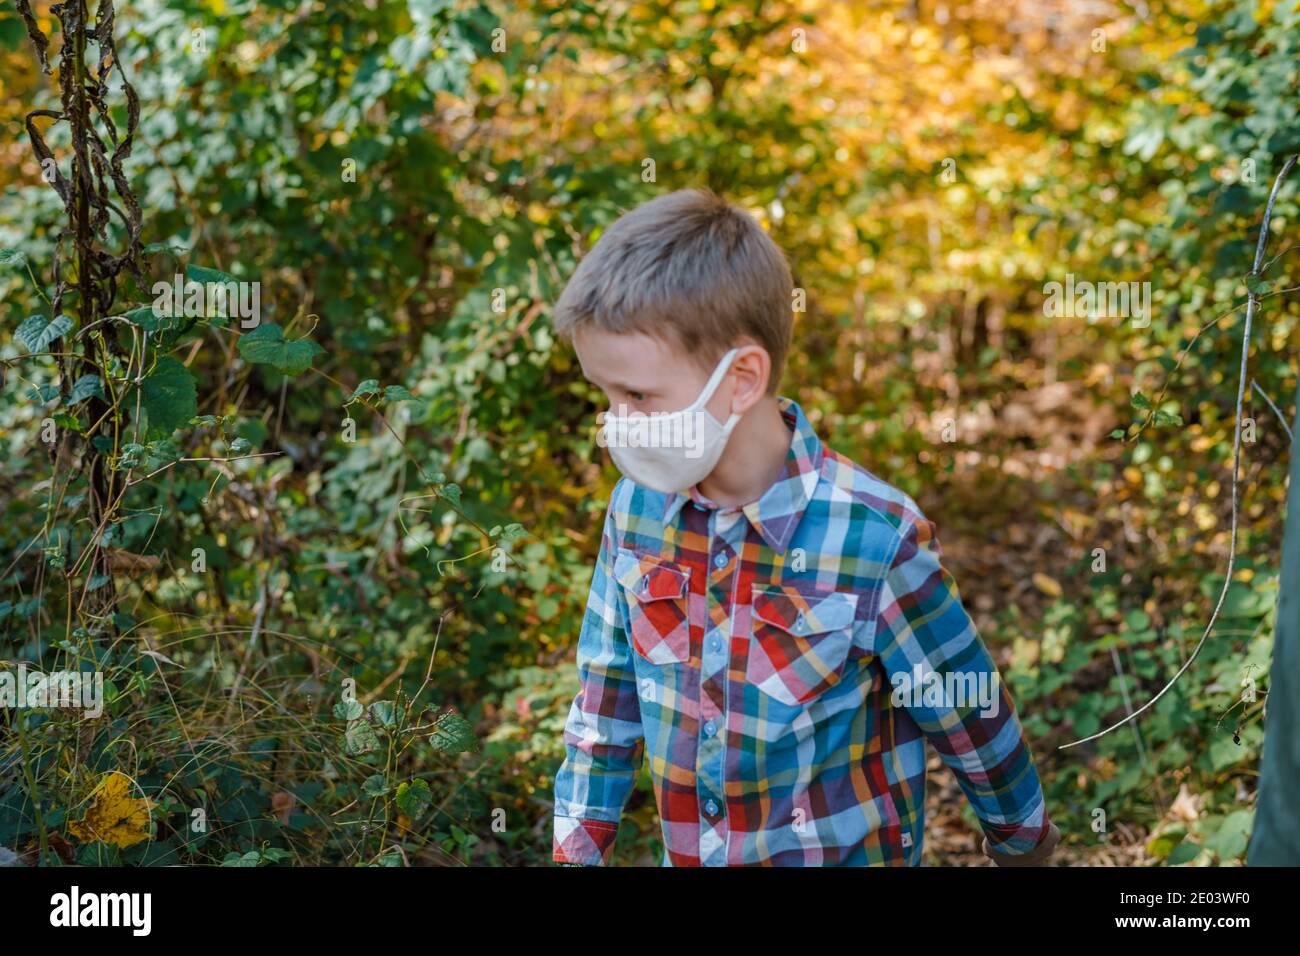 Young boy walking in woods wearing protective face mask Stock Photo